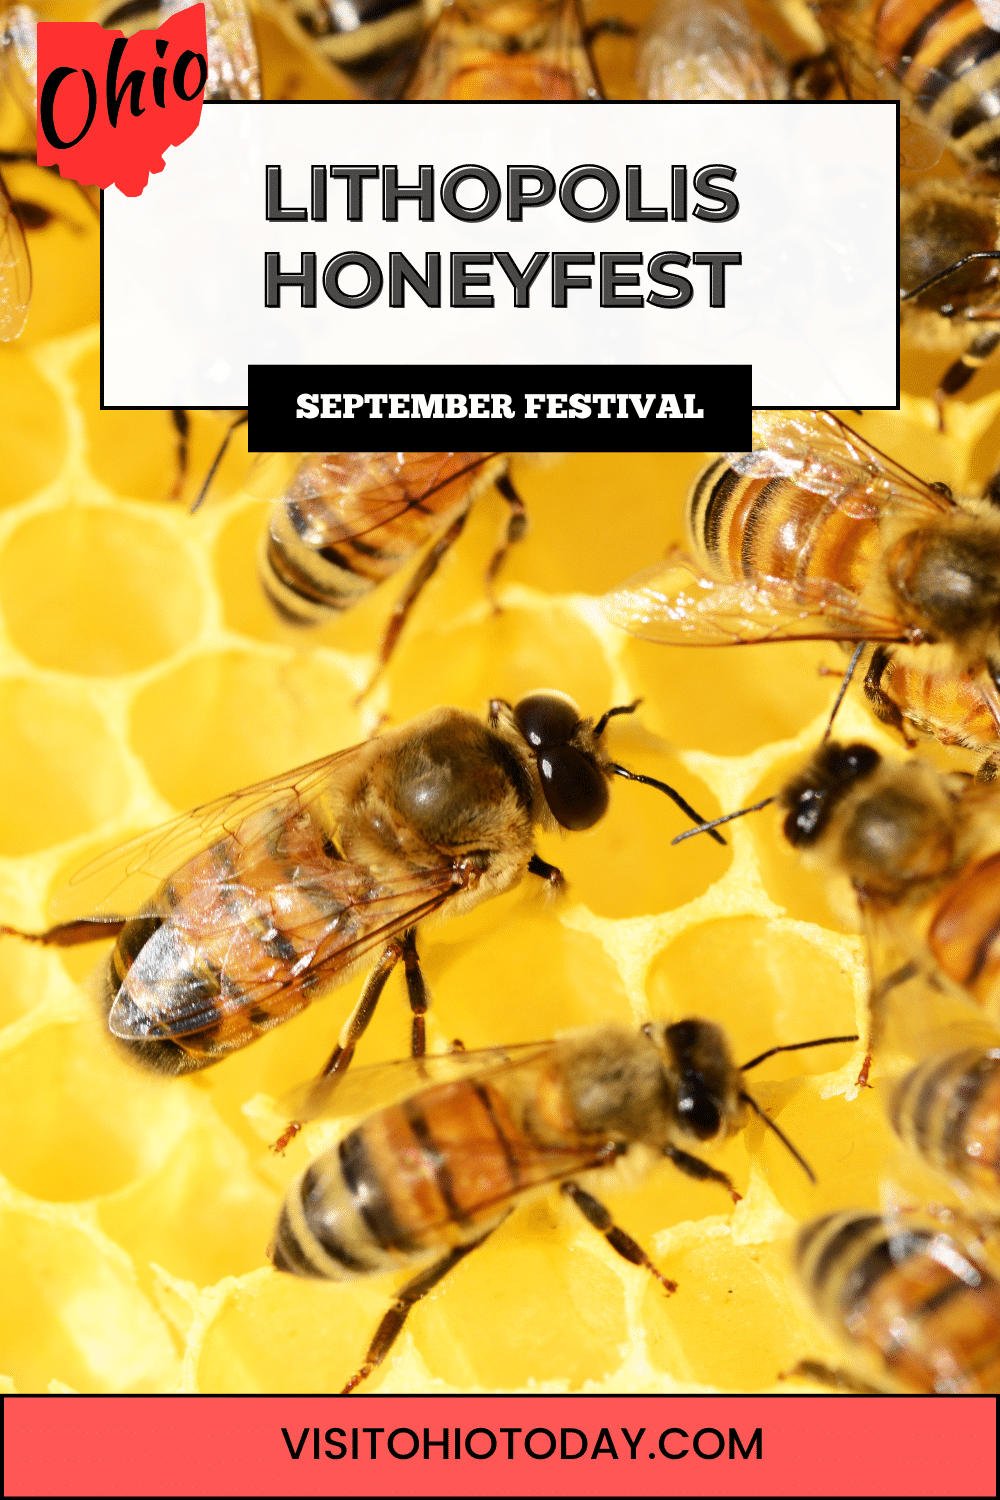 Lithopolis Honeyfest is a captivating September event that celebrates beekeeping, honey bees, and honey while promoting and preserving beekeeping in Ohio and beyond.